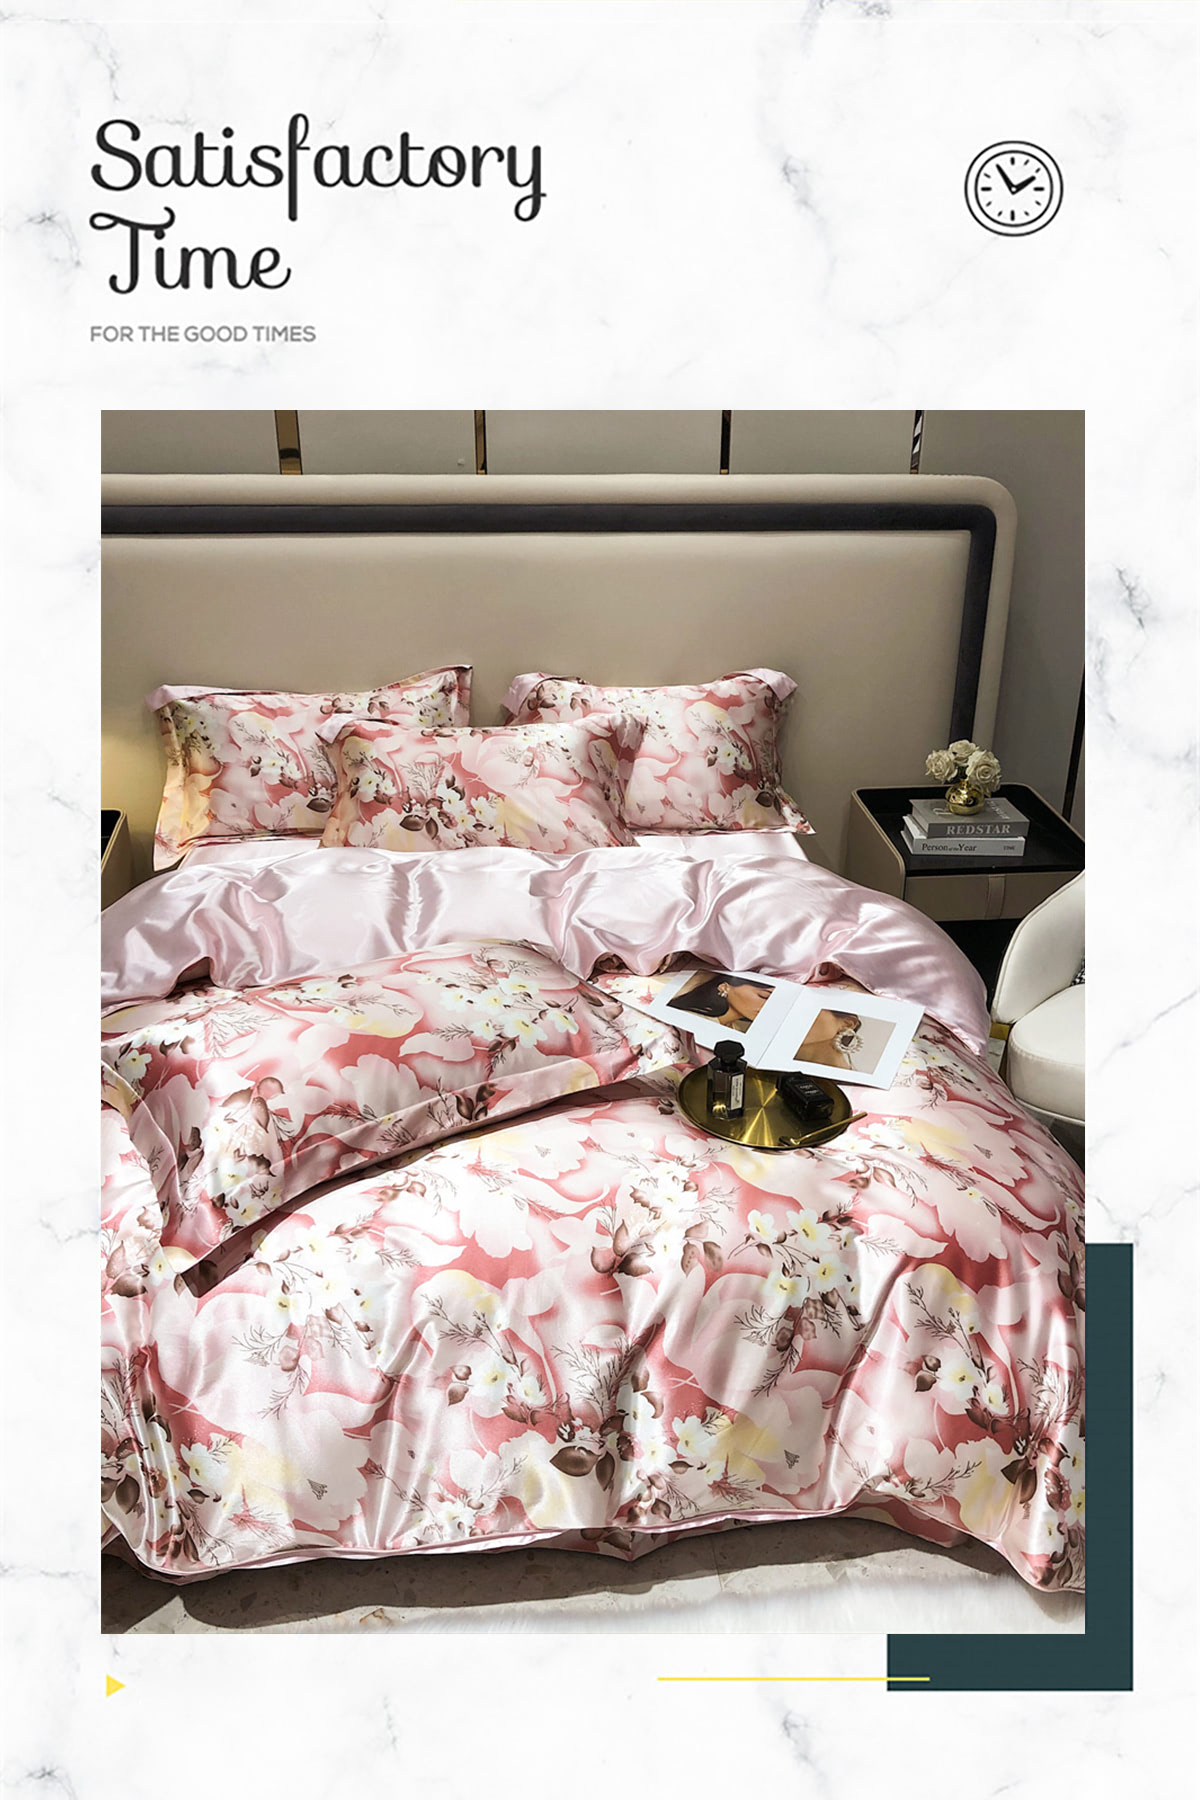 Luxury-Floral-Printed-Satin-Quilt-Cover-Pillowcase-Flat-Sheet